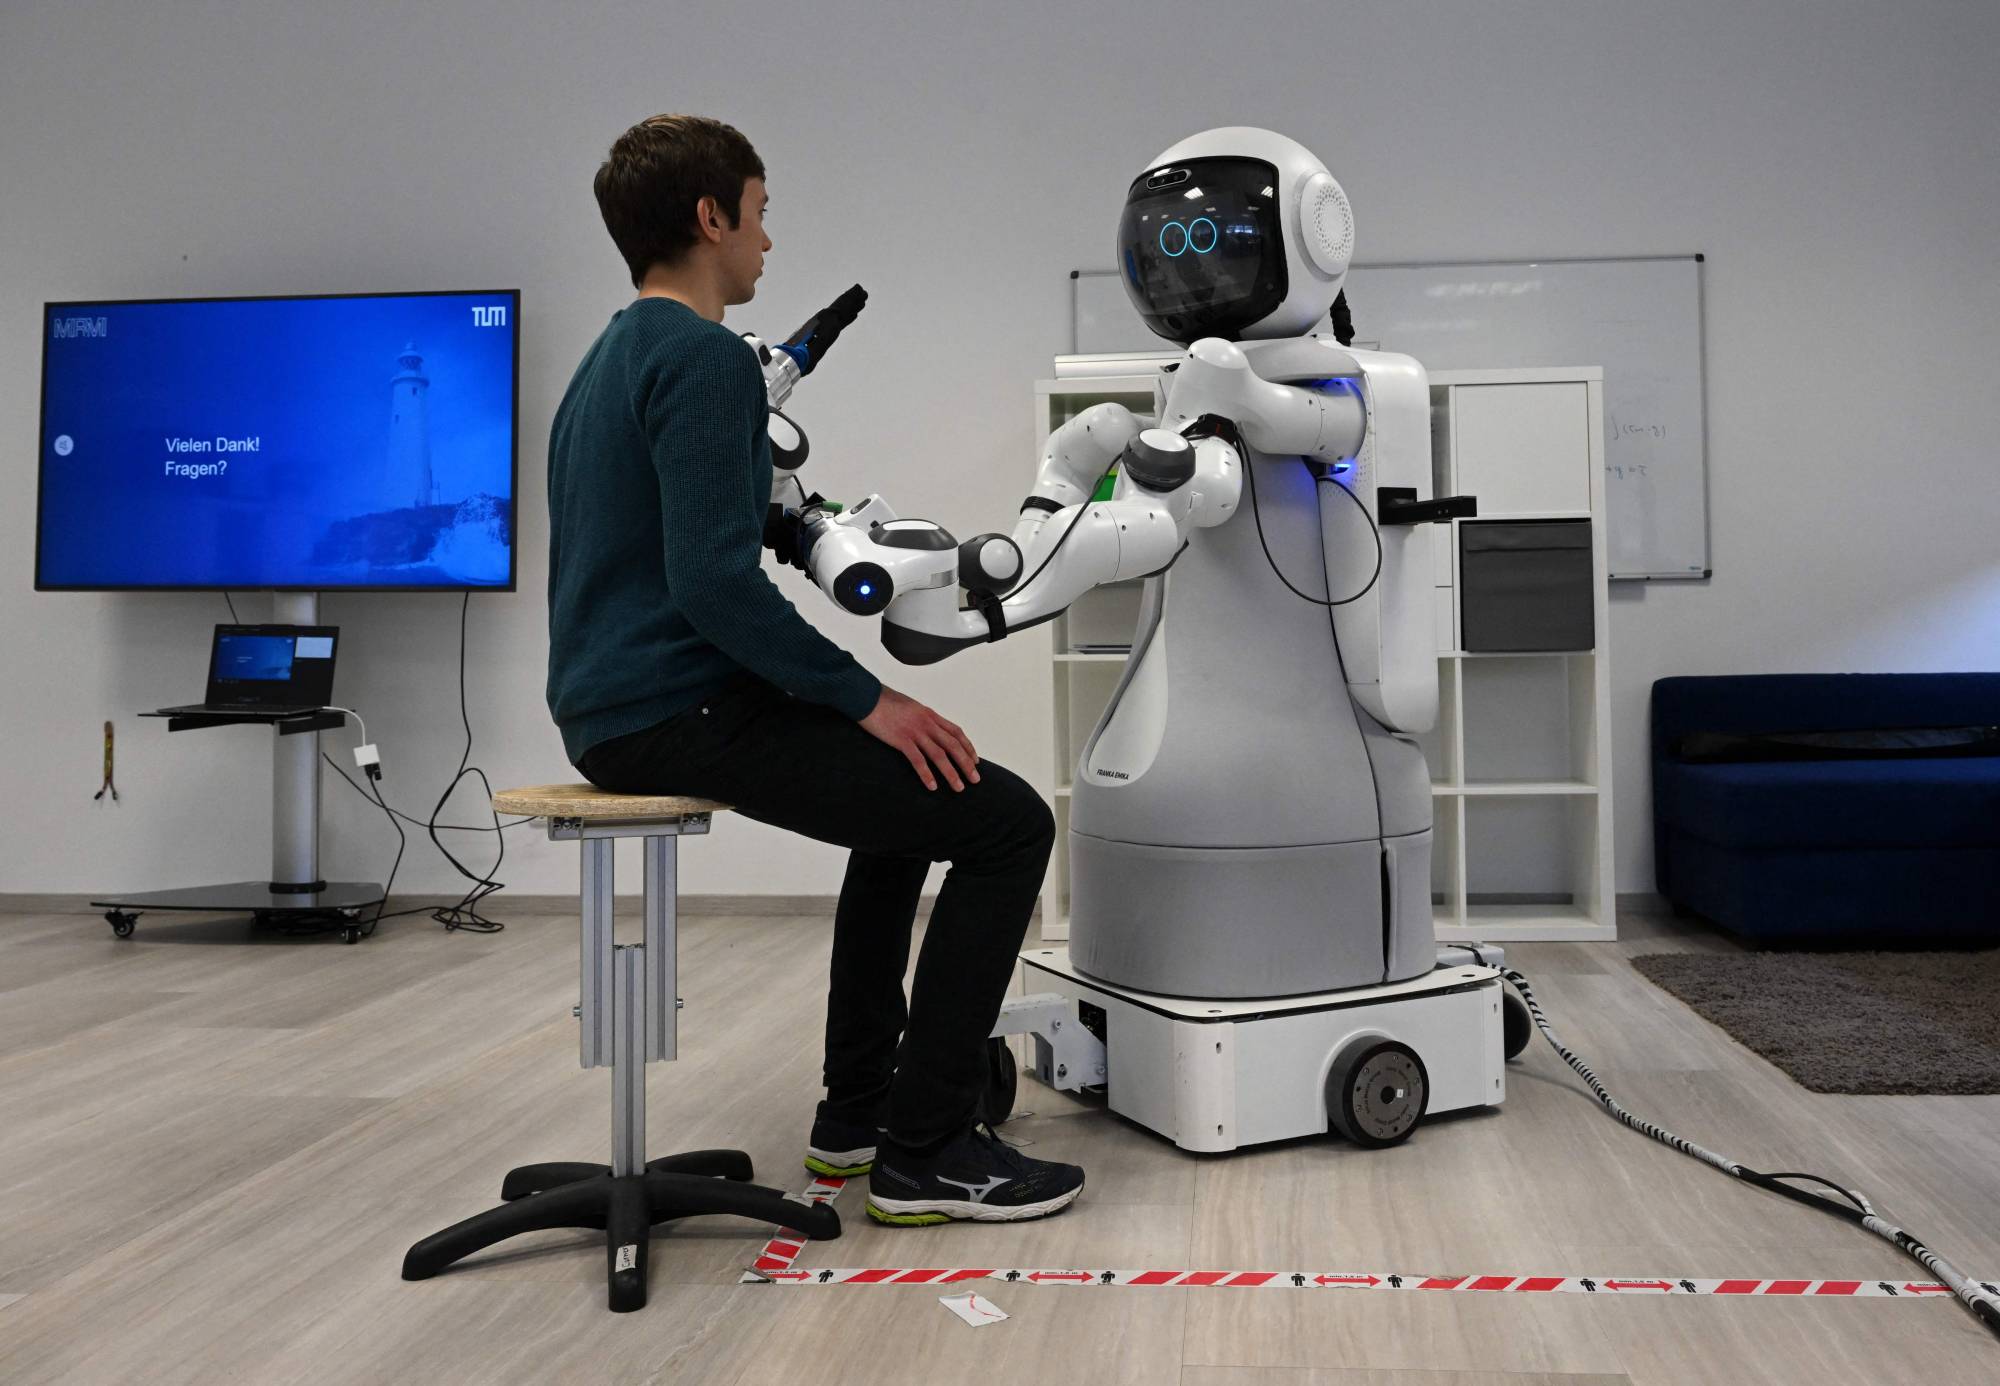 rolle chokolade Ensomhed Lacking health workers, Germany taps robots for elder care | The Japan Times